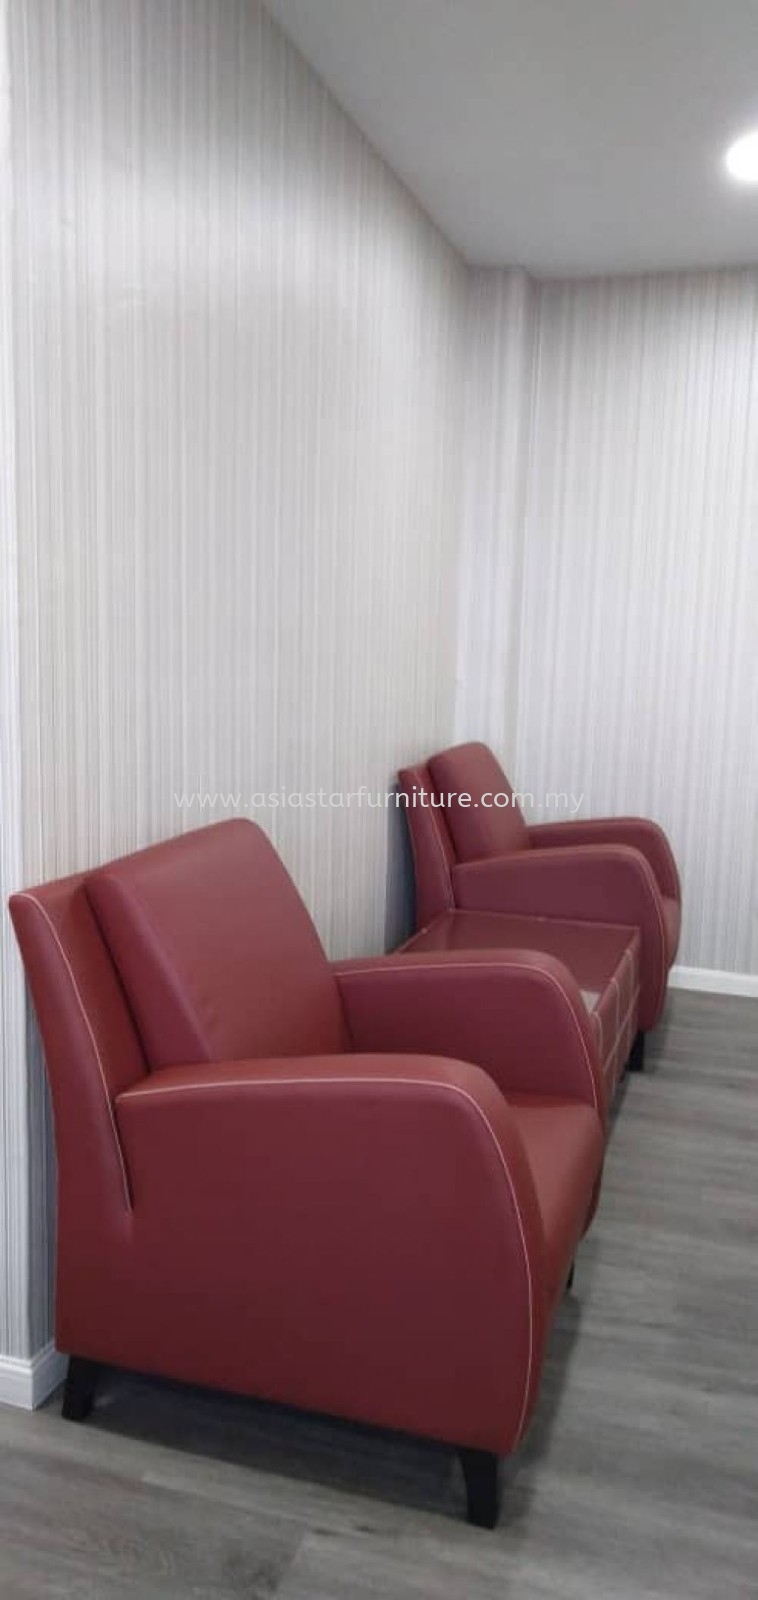 DELIVERY & INSTALLATION CAMELIA ONE SEATER OFFICE SOFA OFFICE FURNITURE SS15, SUBANG JAYA